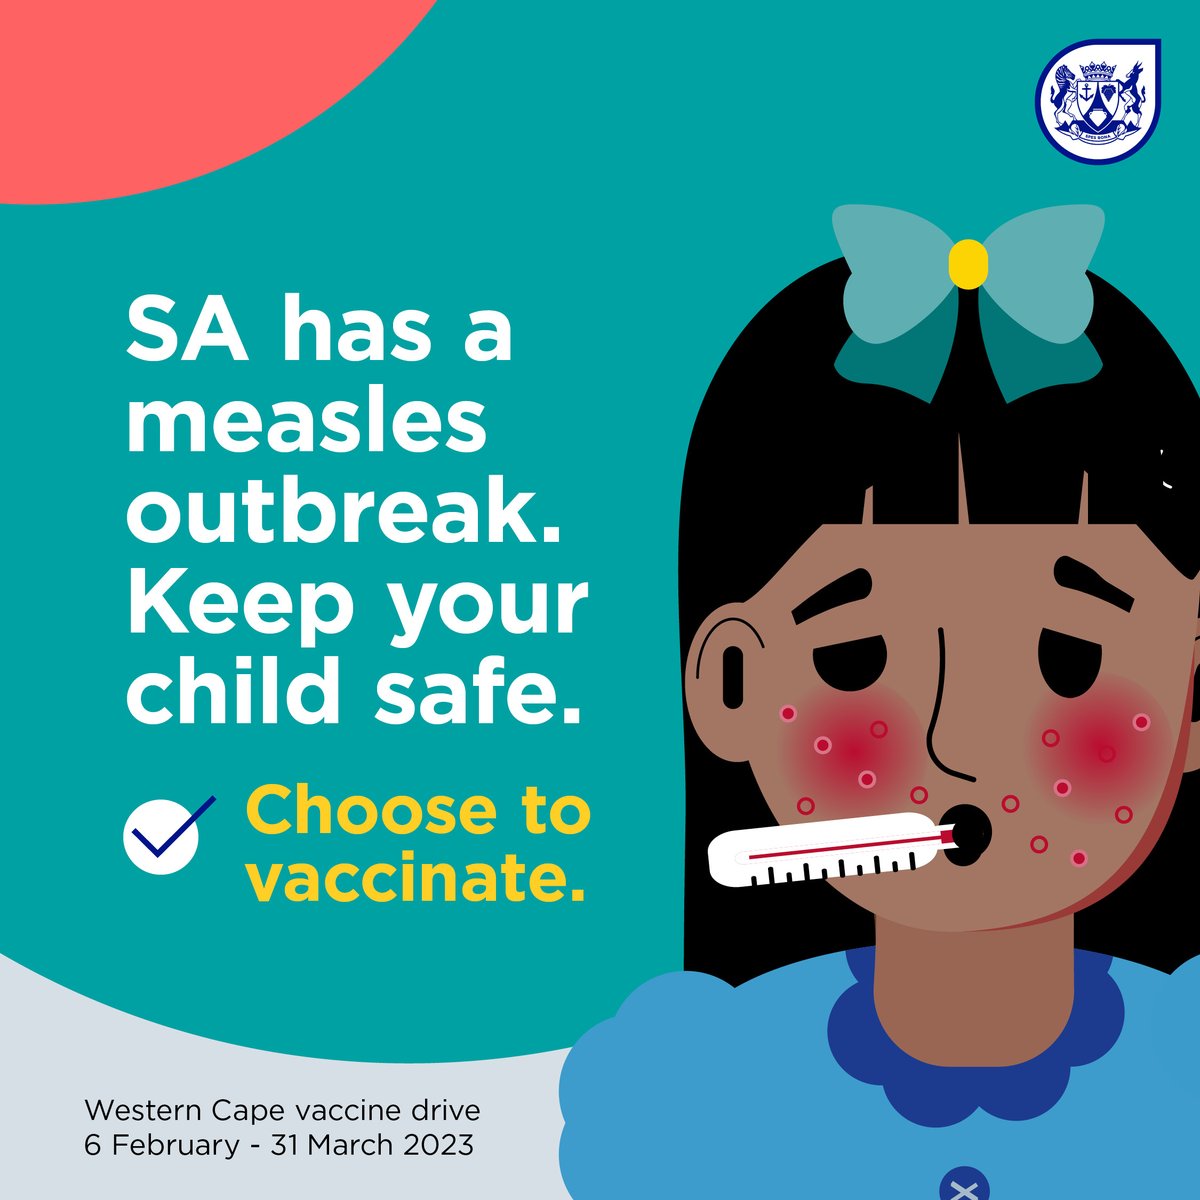 Measles can be a dangerous disease, so give your signed consent for your child to be vaccinated at school or creche, to protect their health and life. For more information call 0800 000000 or visit bitly.ws/zGXT #VaccinesWorkWC